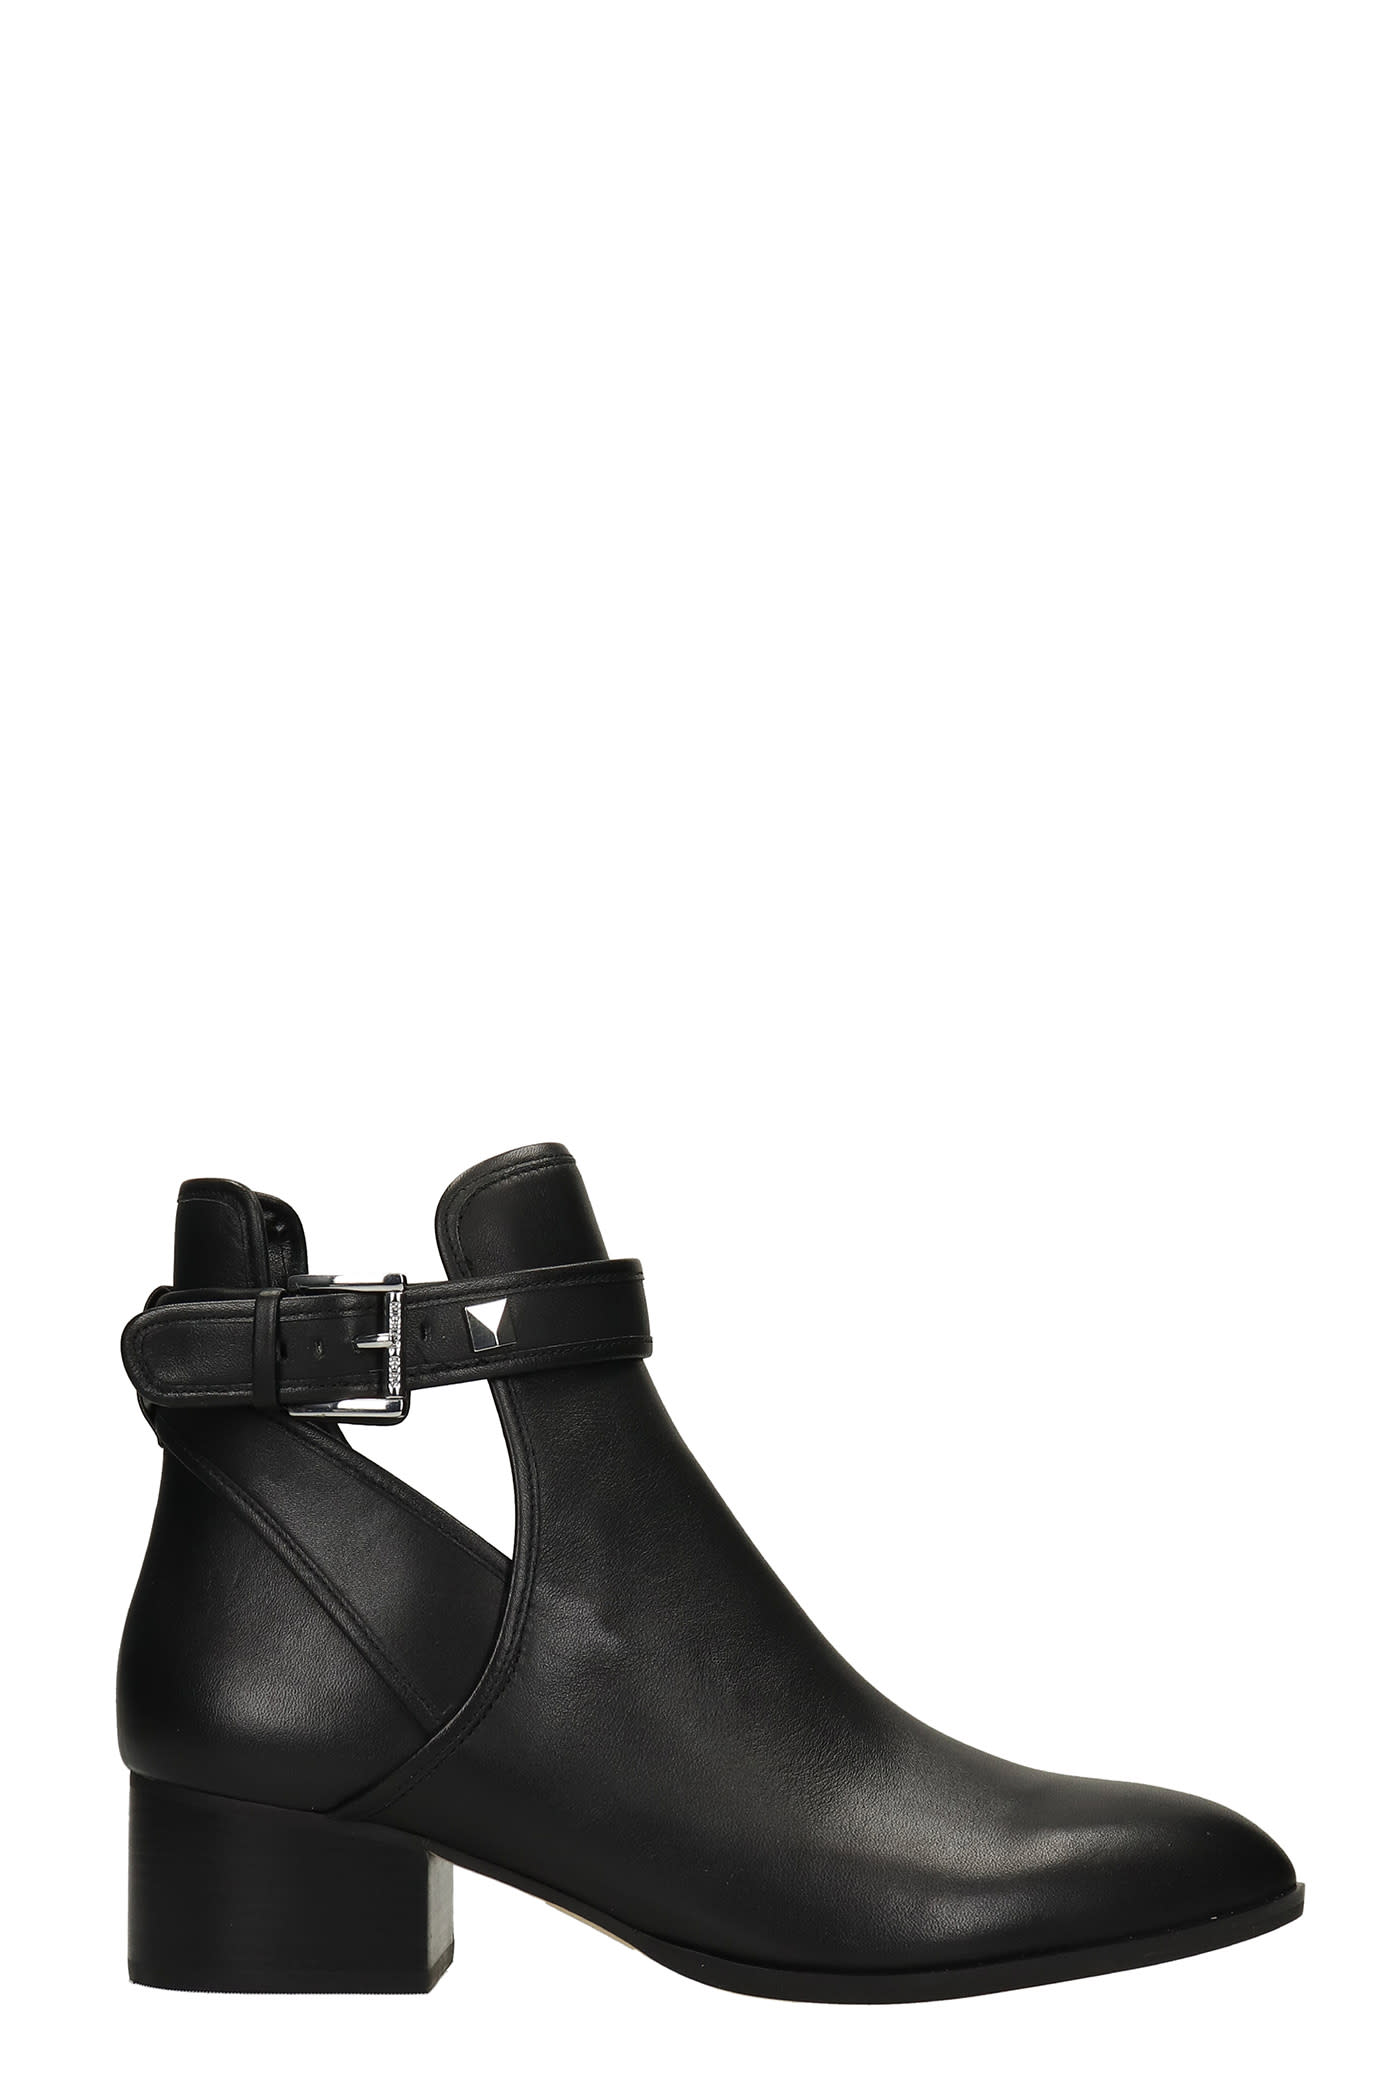 Michael Kors Britton Low Heels Ankle Boots In Black Leather